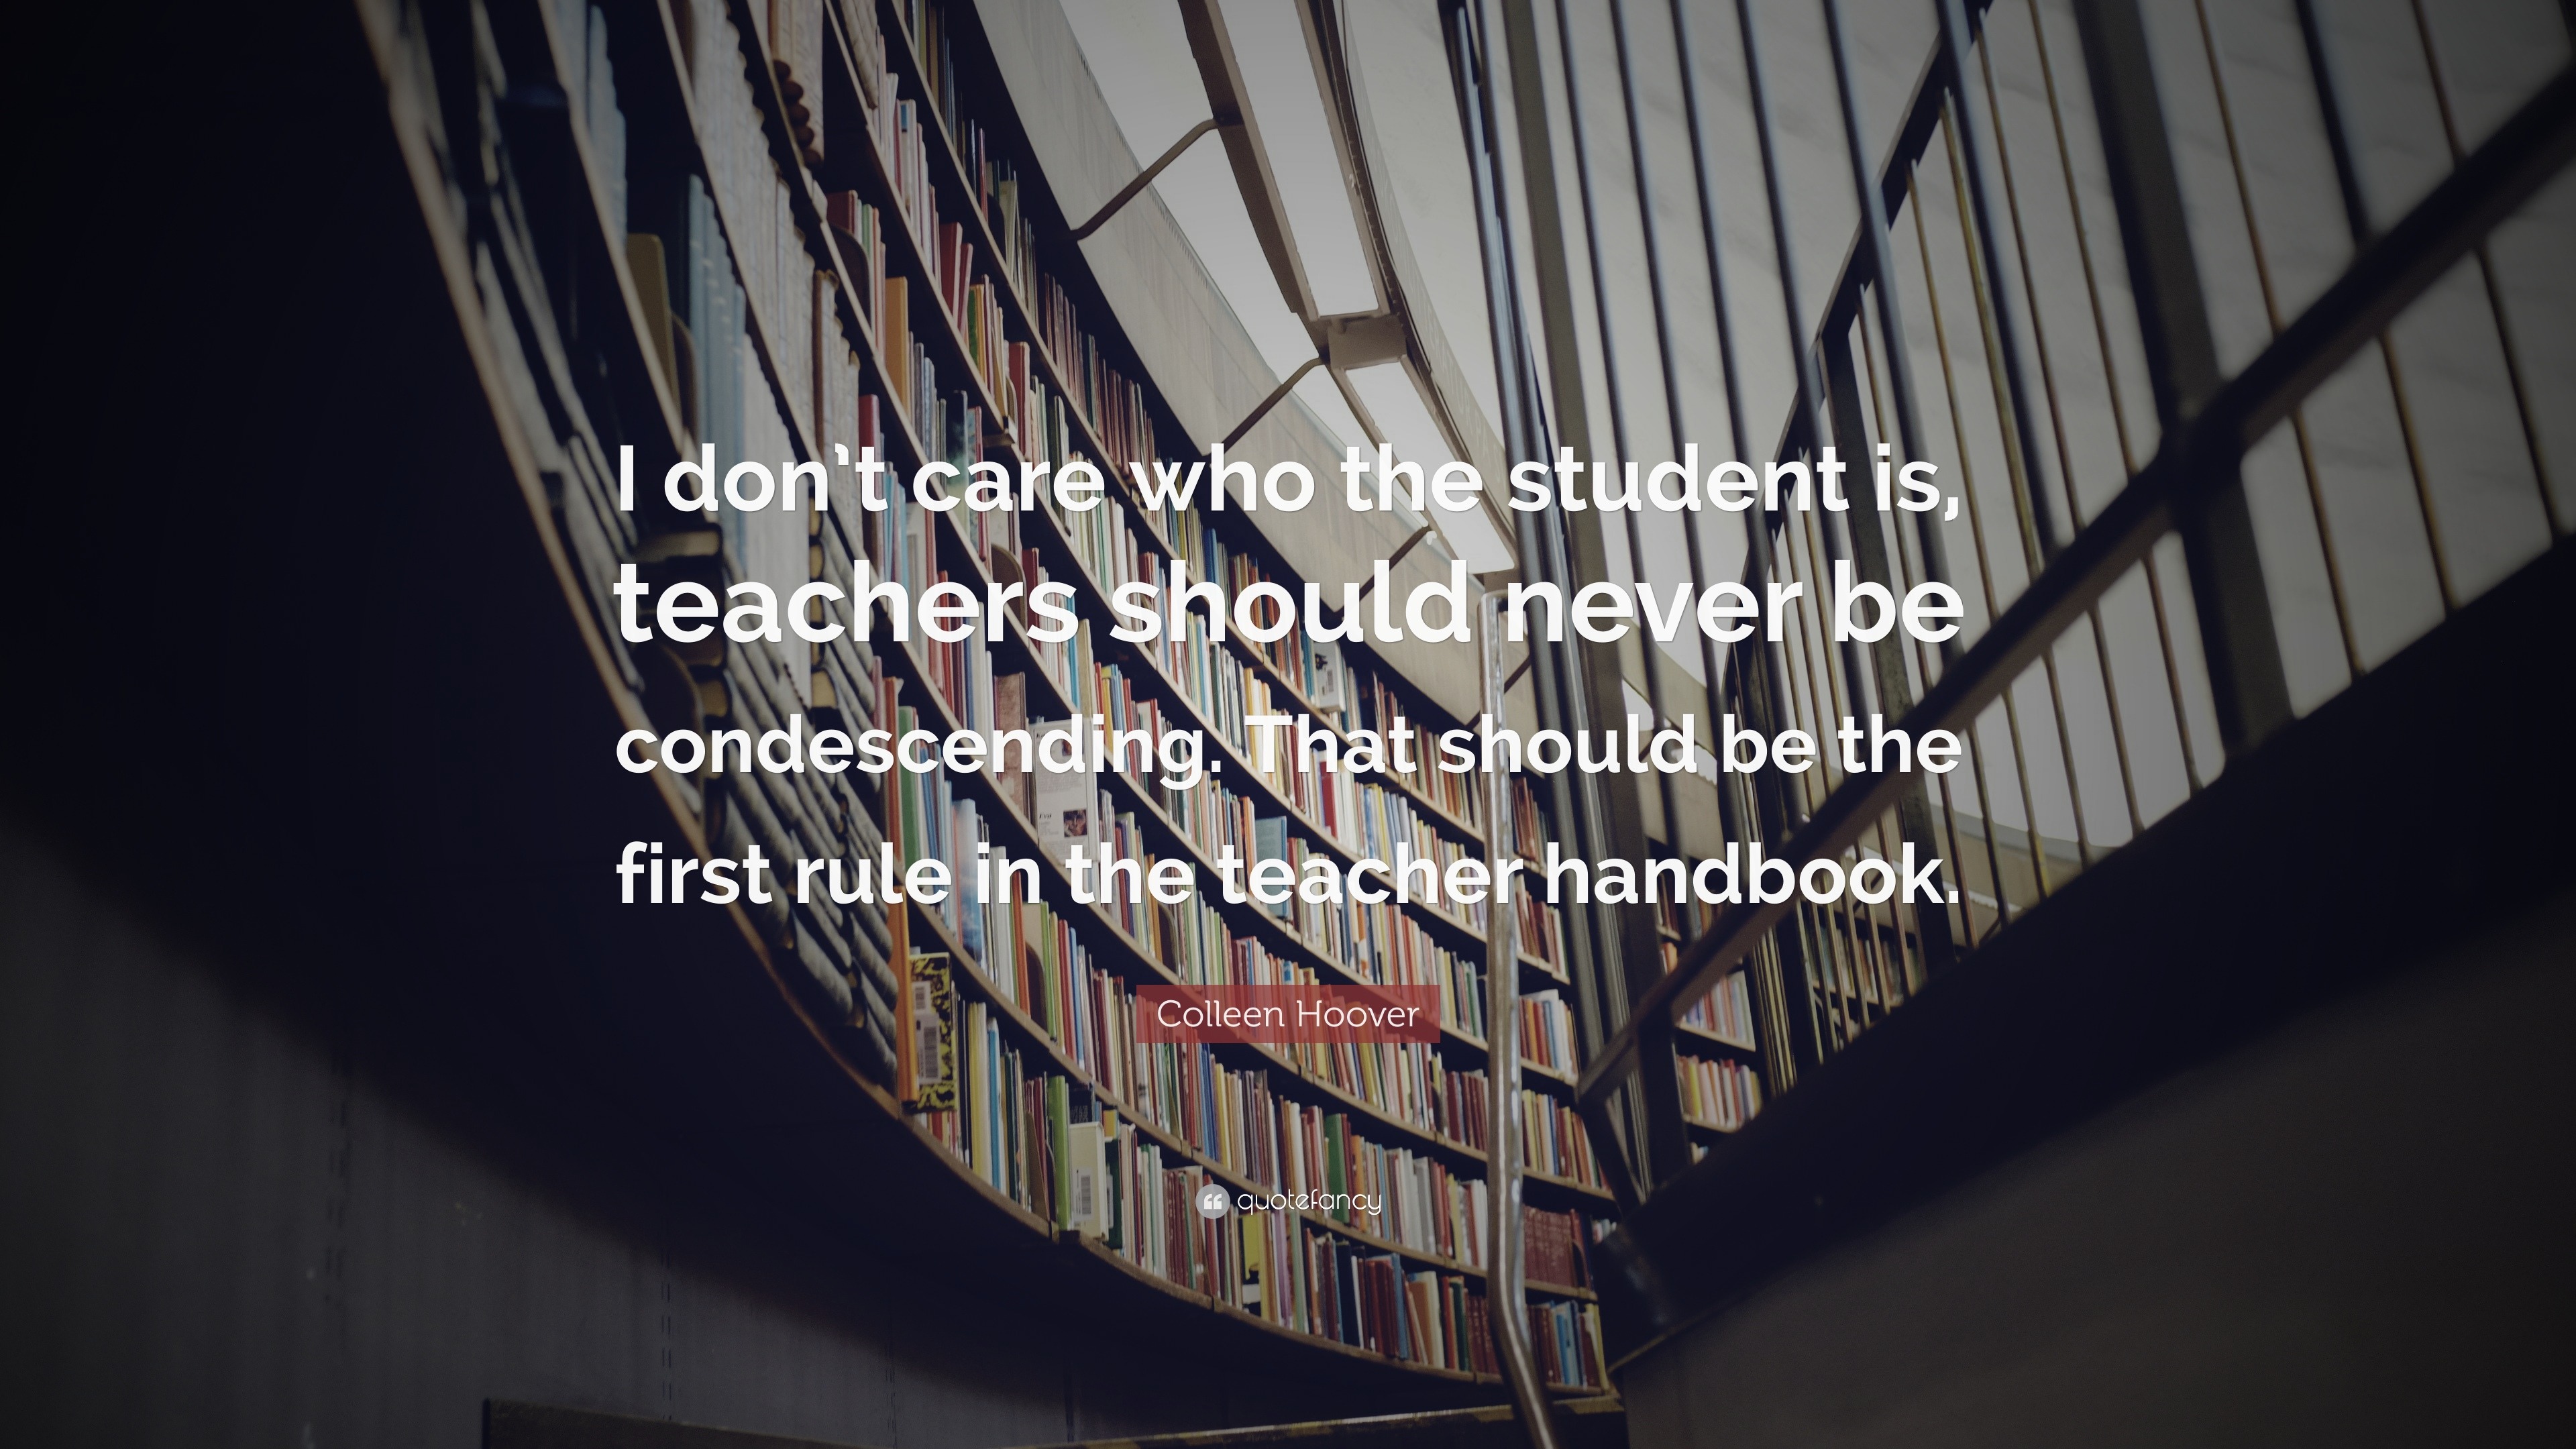 Colleen Hoover Quote: “I don’t care who the student is, teachers should